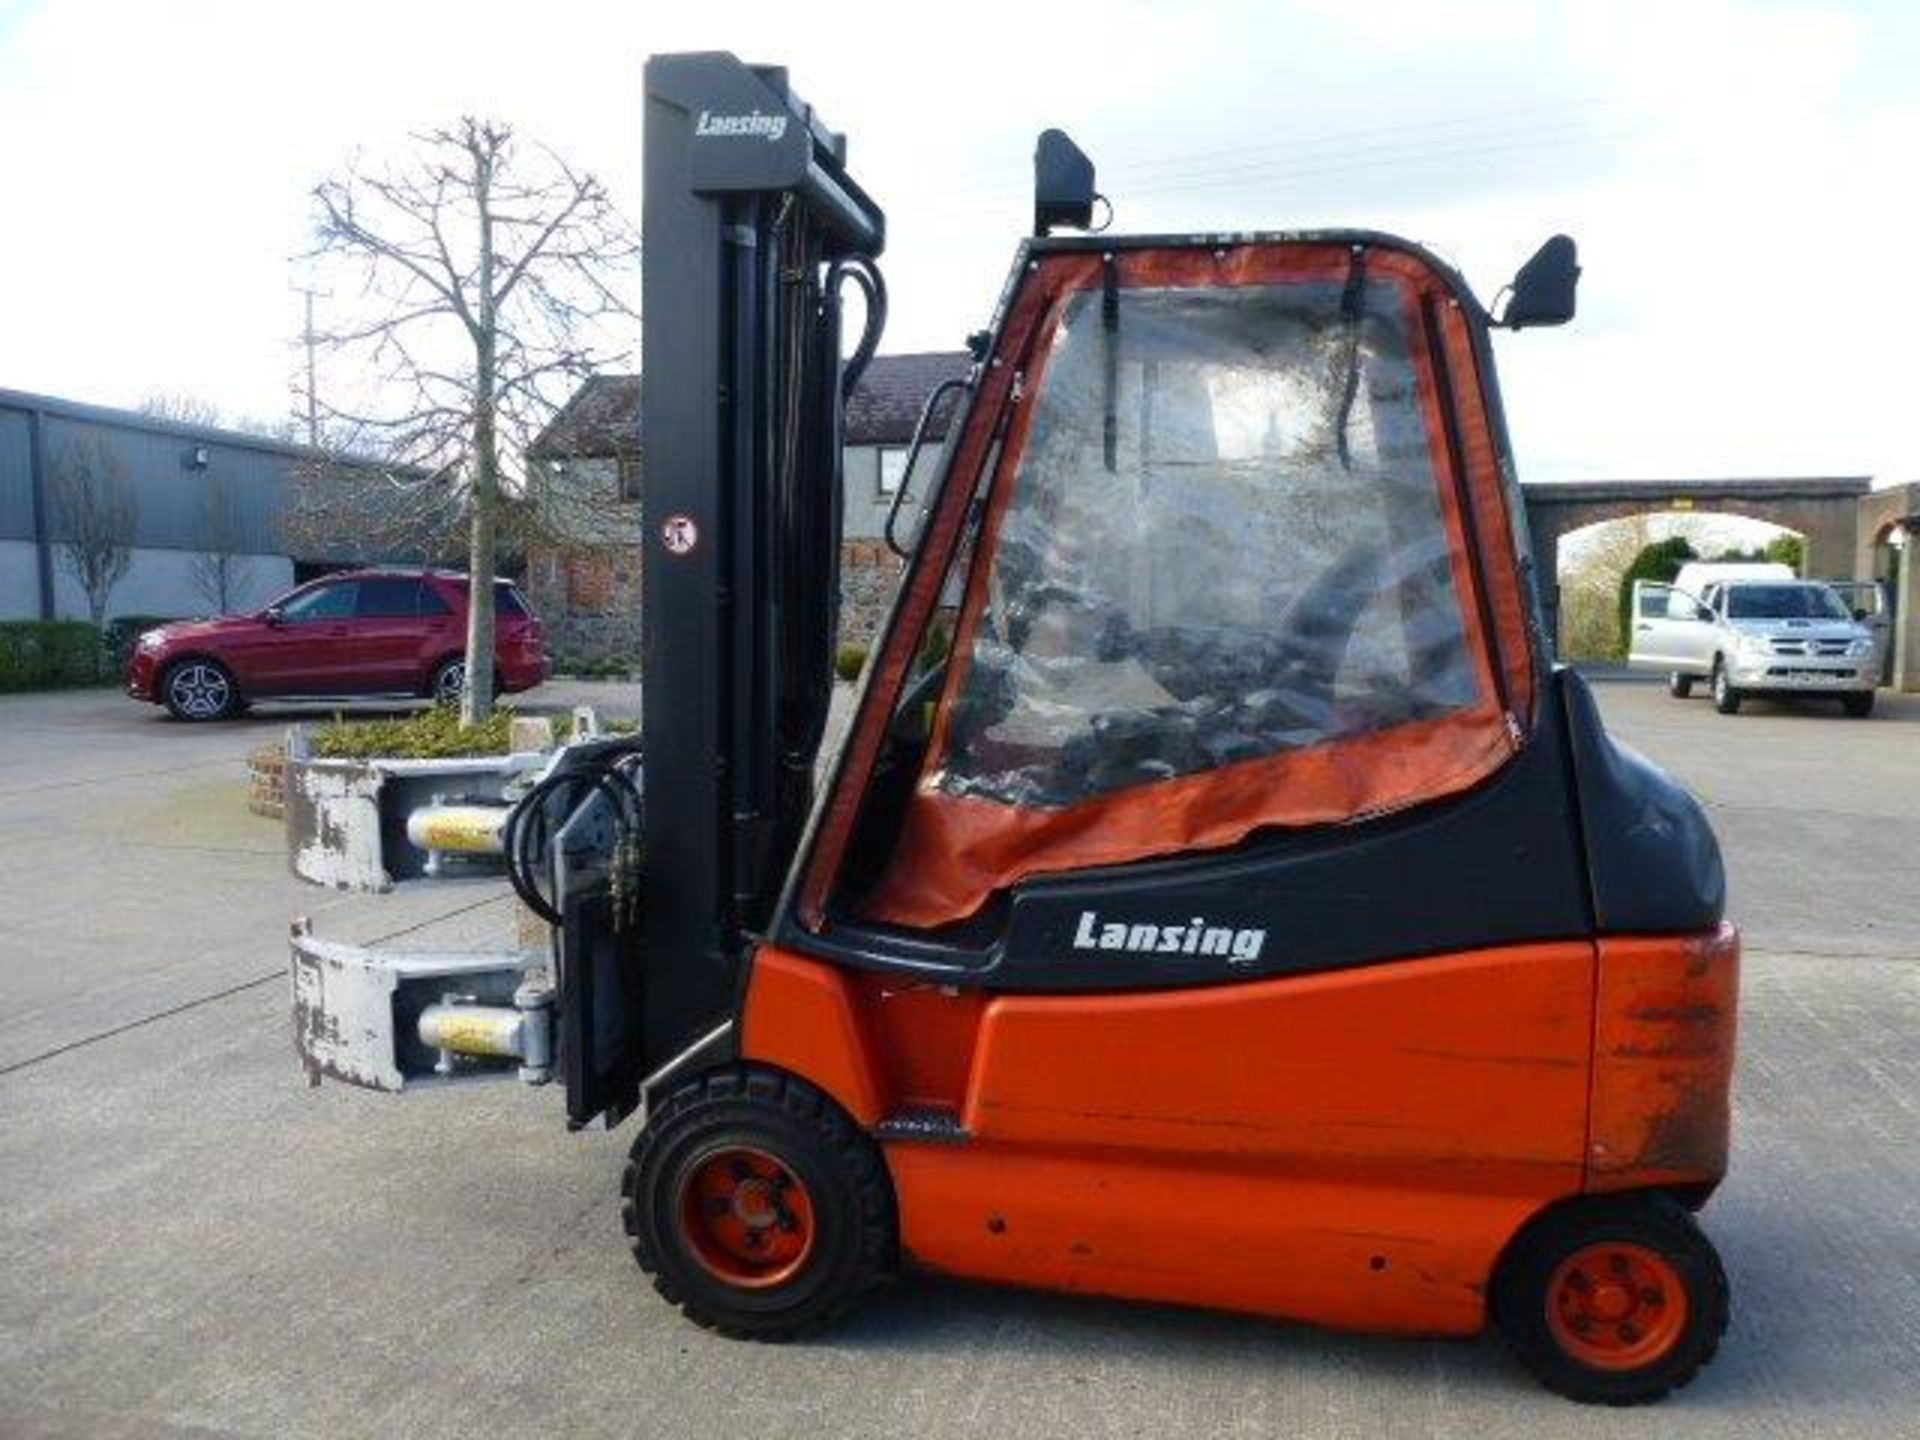 Yr 2000 Lansing Linde Electric forklift c/w paper bale rotating attachment